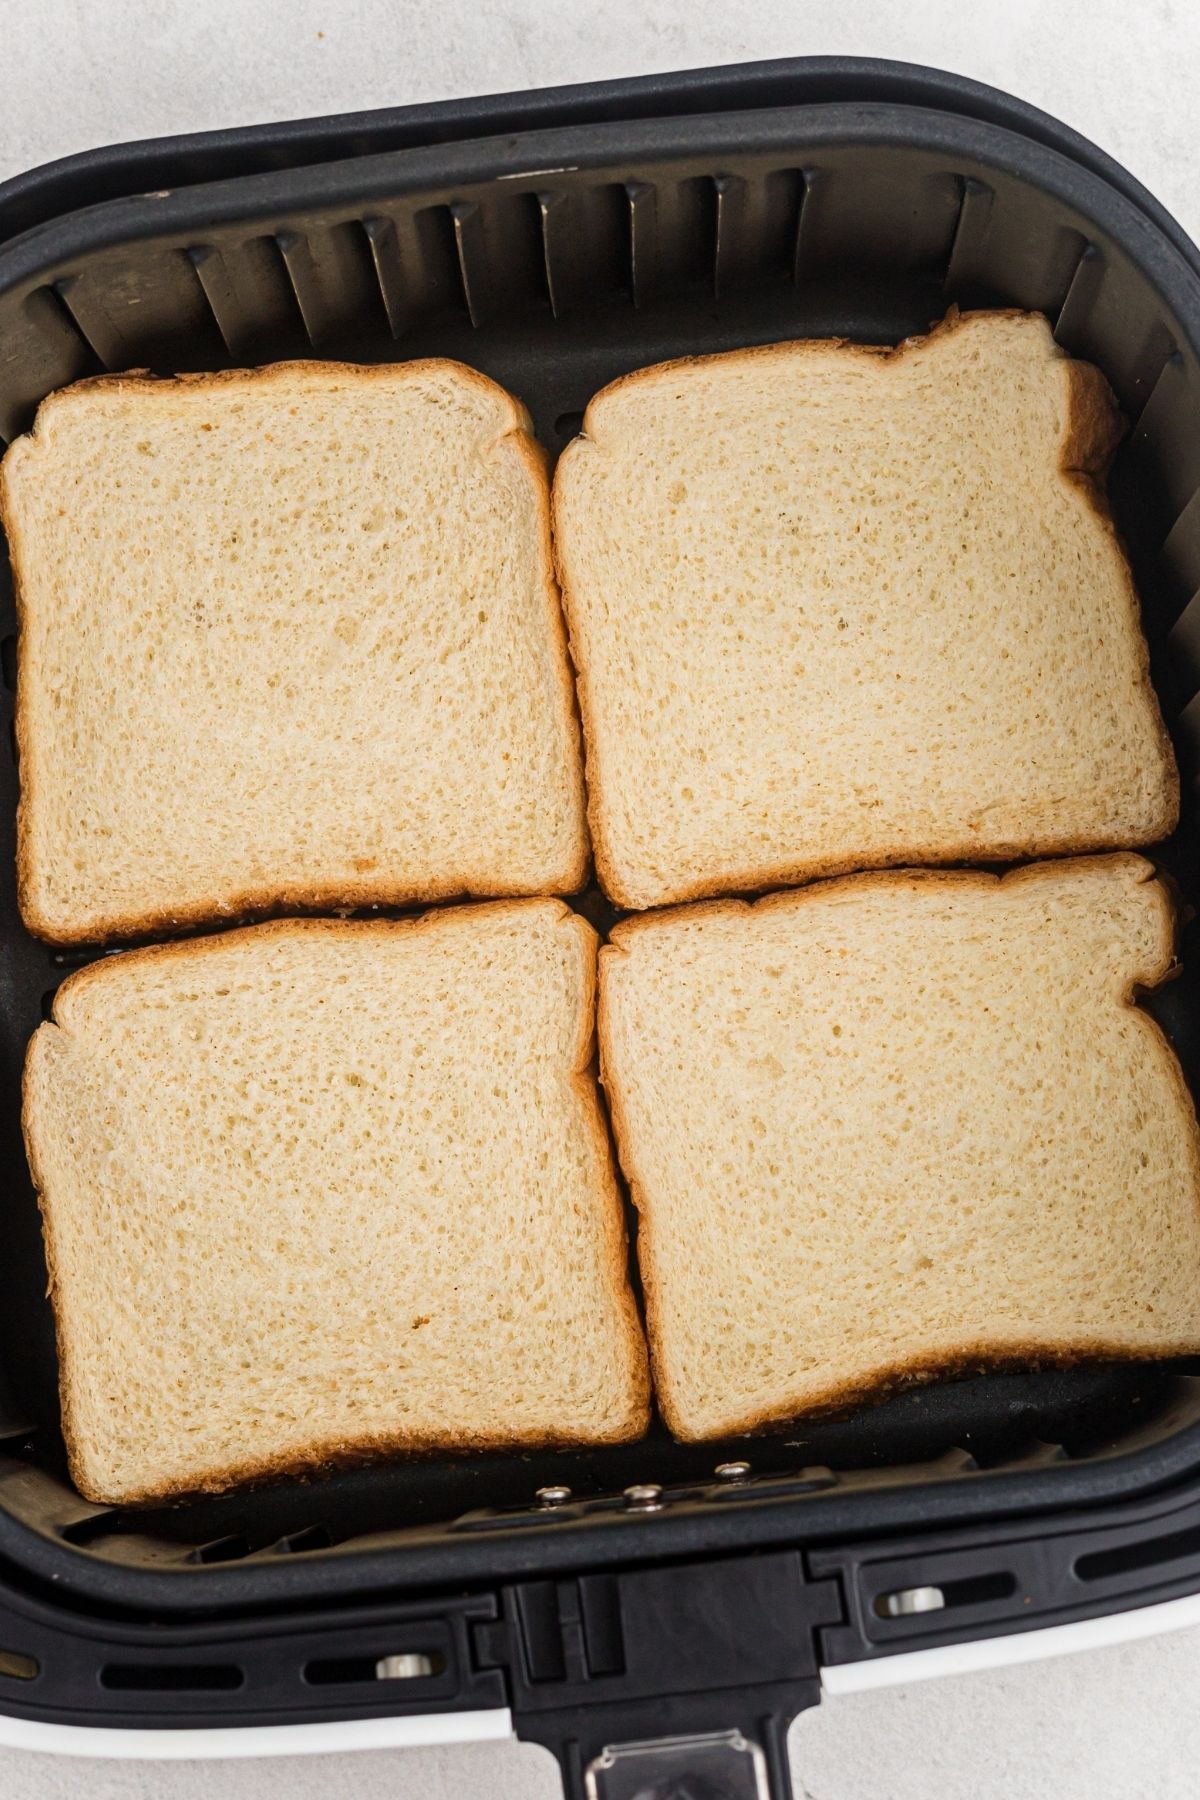 four slices of bread in the air fryer basket before being cooked